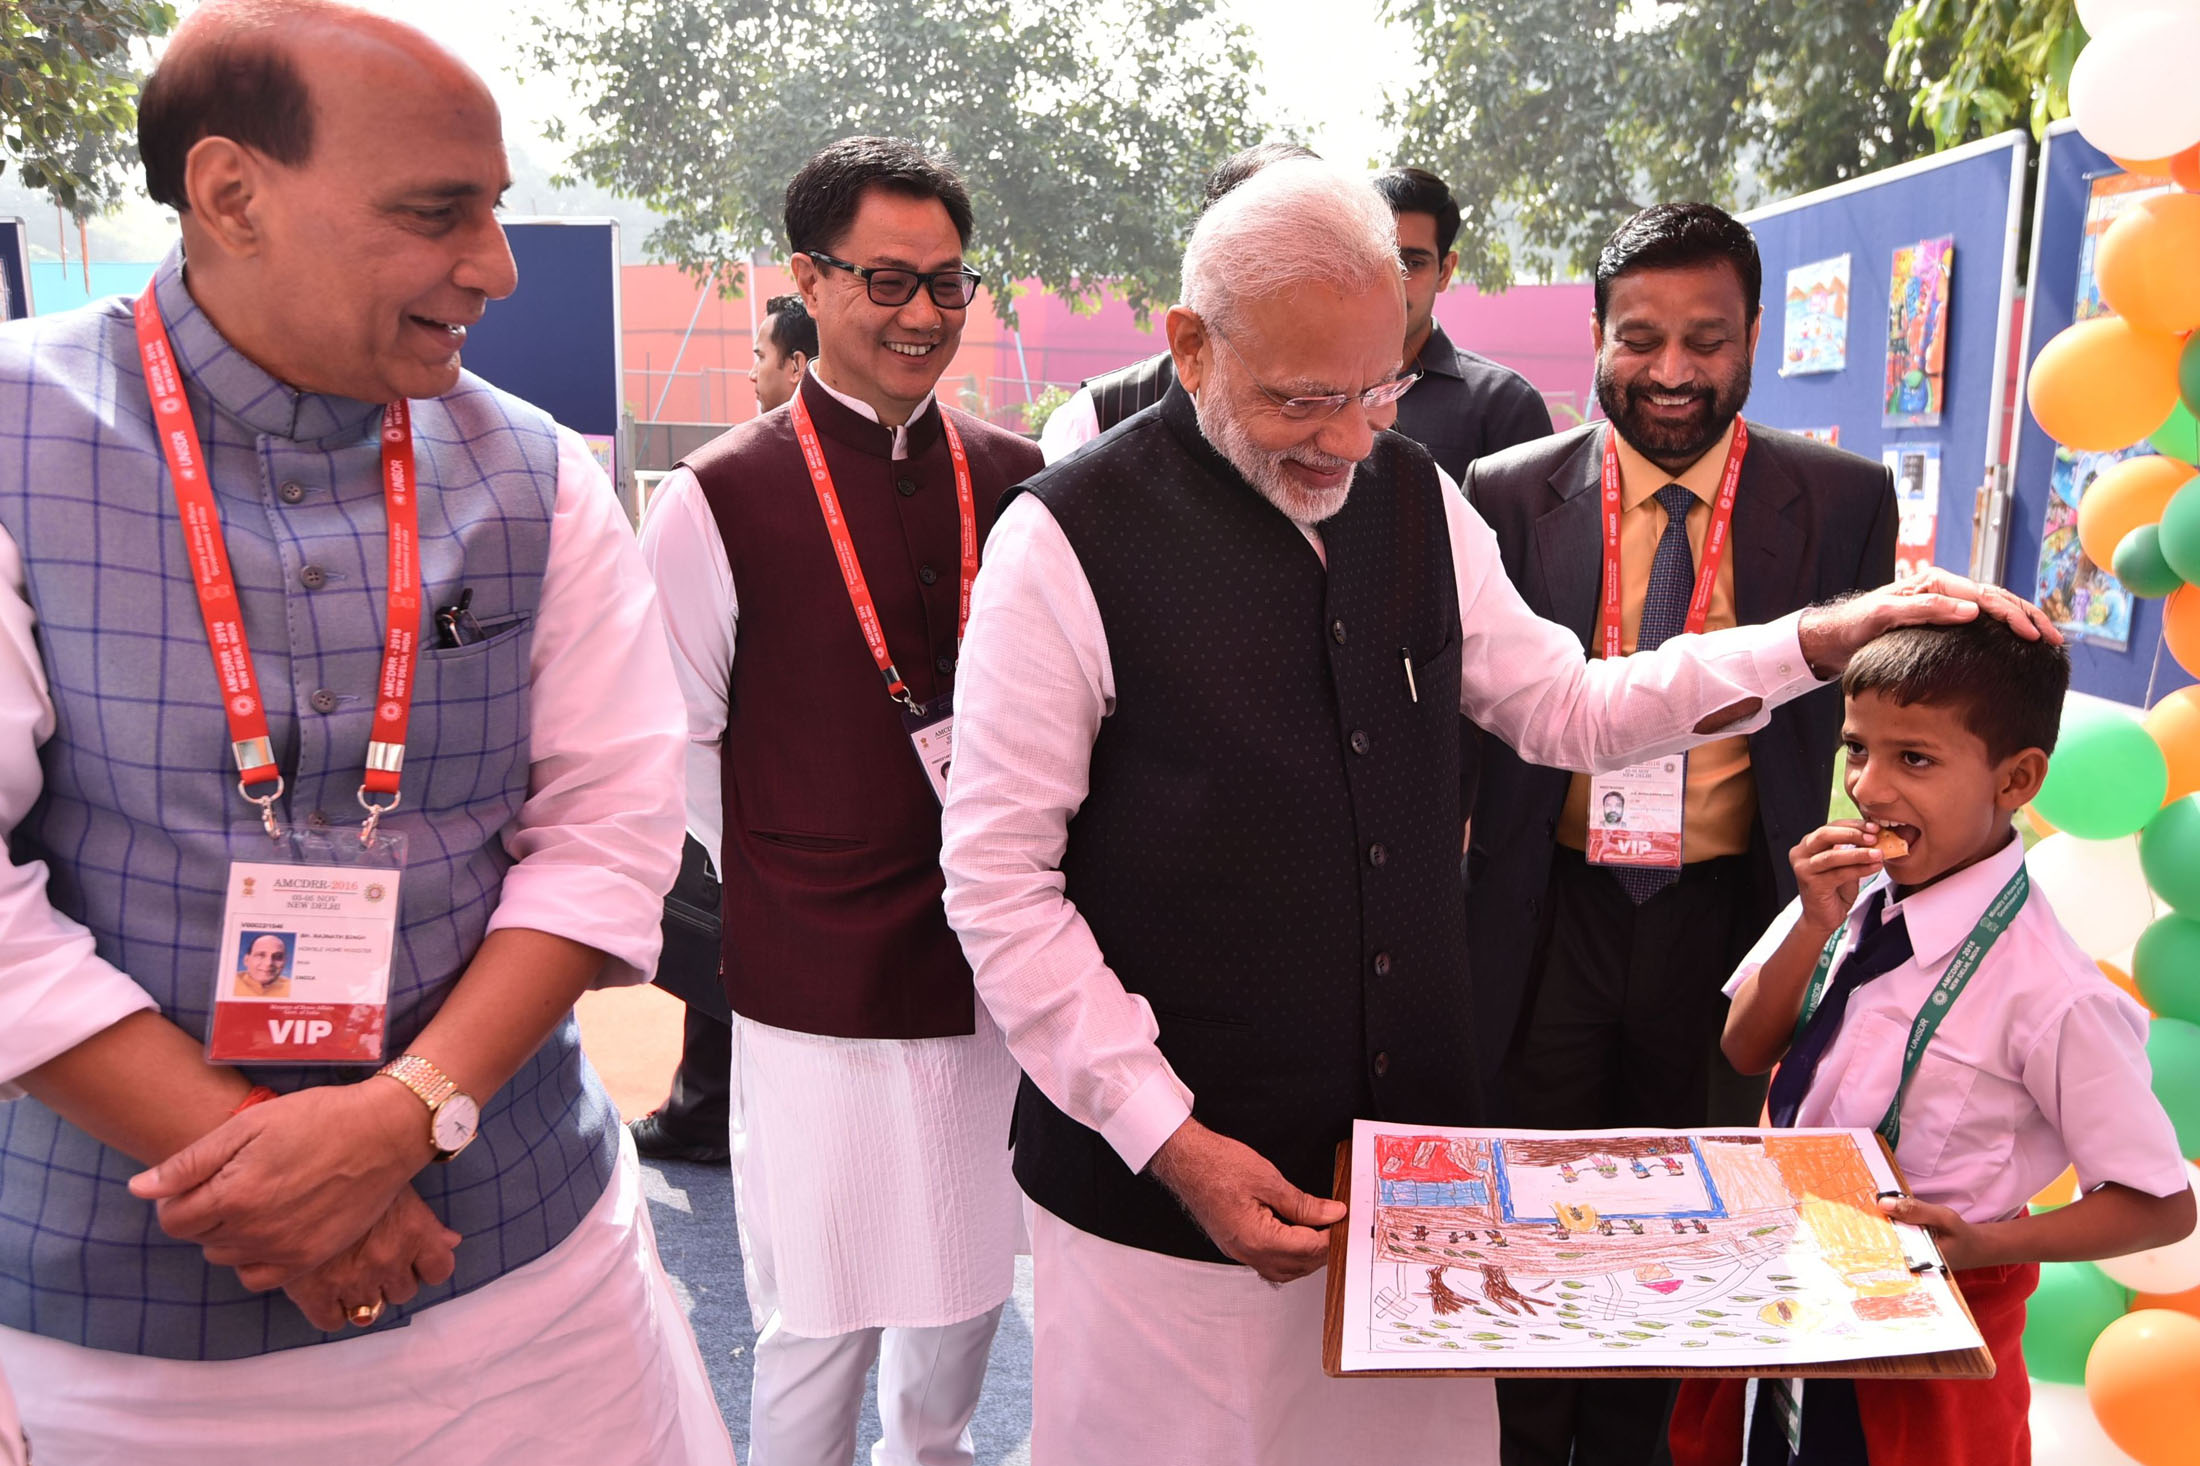 The Prime Minister, Shri Narendra Modi and Home Minister Shri Rajnath Singh with the participants of Painting Contest at the Asian Ministerial Conference on Disaster Risk Reduction, in New Delhi on November 03, 2016. 	The Minister of State for Home Affairs, Shri Kiren Rijiju also seen.